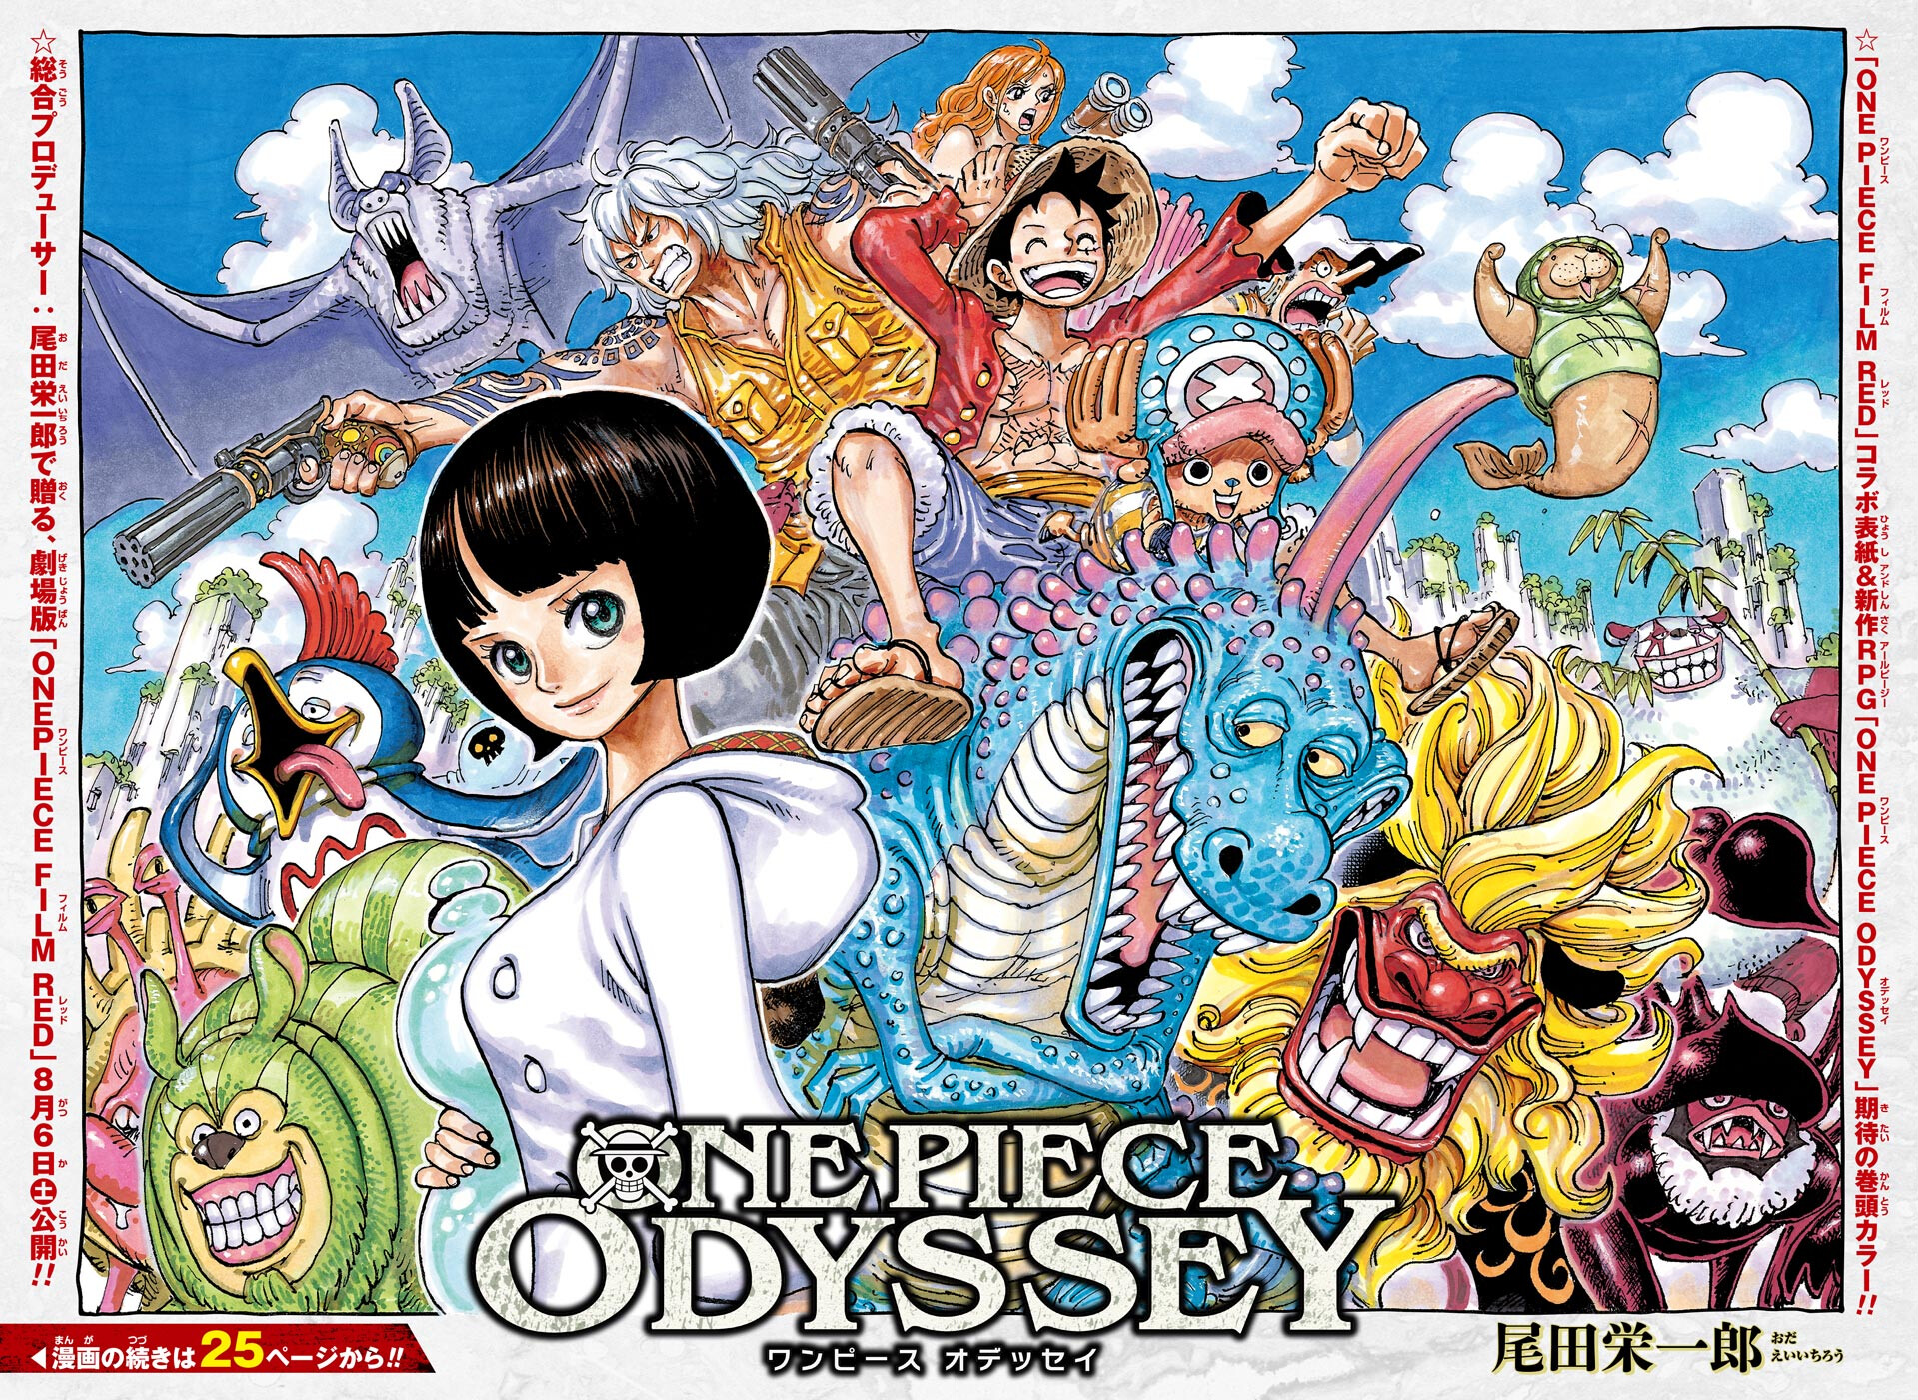 One Piece Chapter 1057 Release Date – Find out now